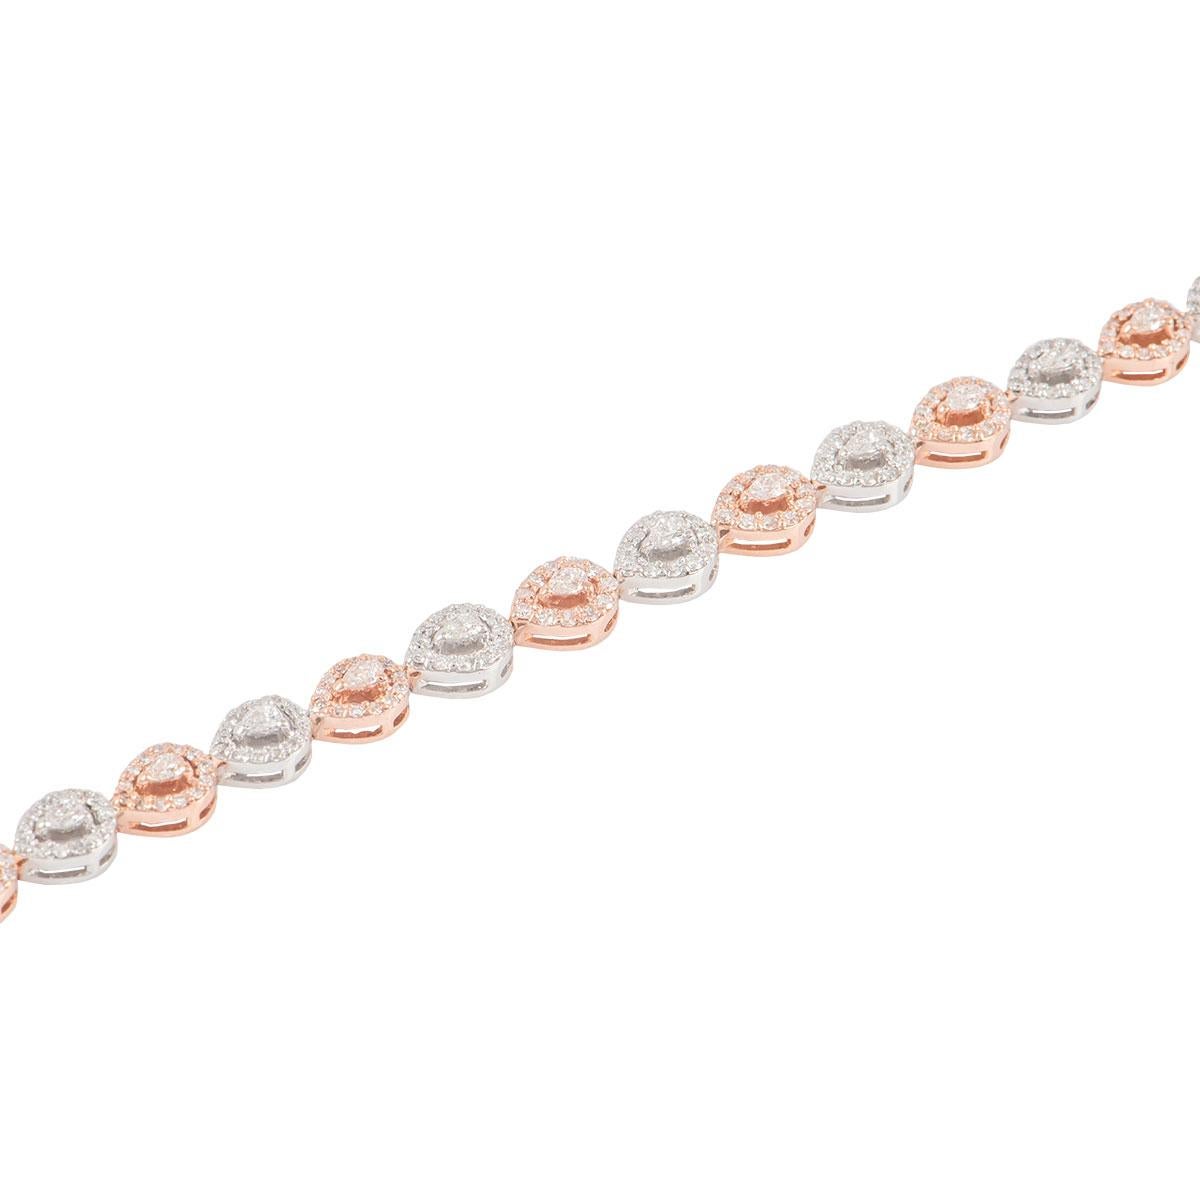 An 18k white and rose gold diamond line bracelet. The bracelet is made up of 24 pear cut diamonds each complemented by a halo of round brilliant cut diamonds around the outer edge. The pear cut diamonds have a total weight of 1.03ct and the round